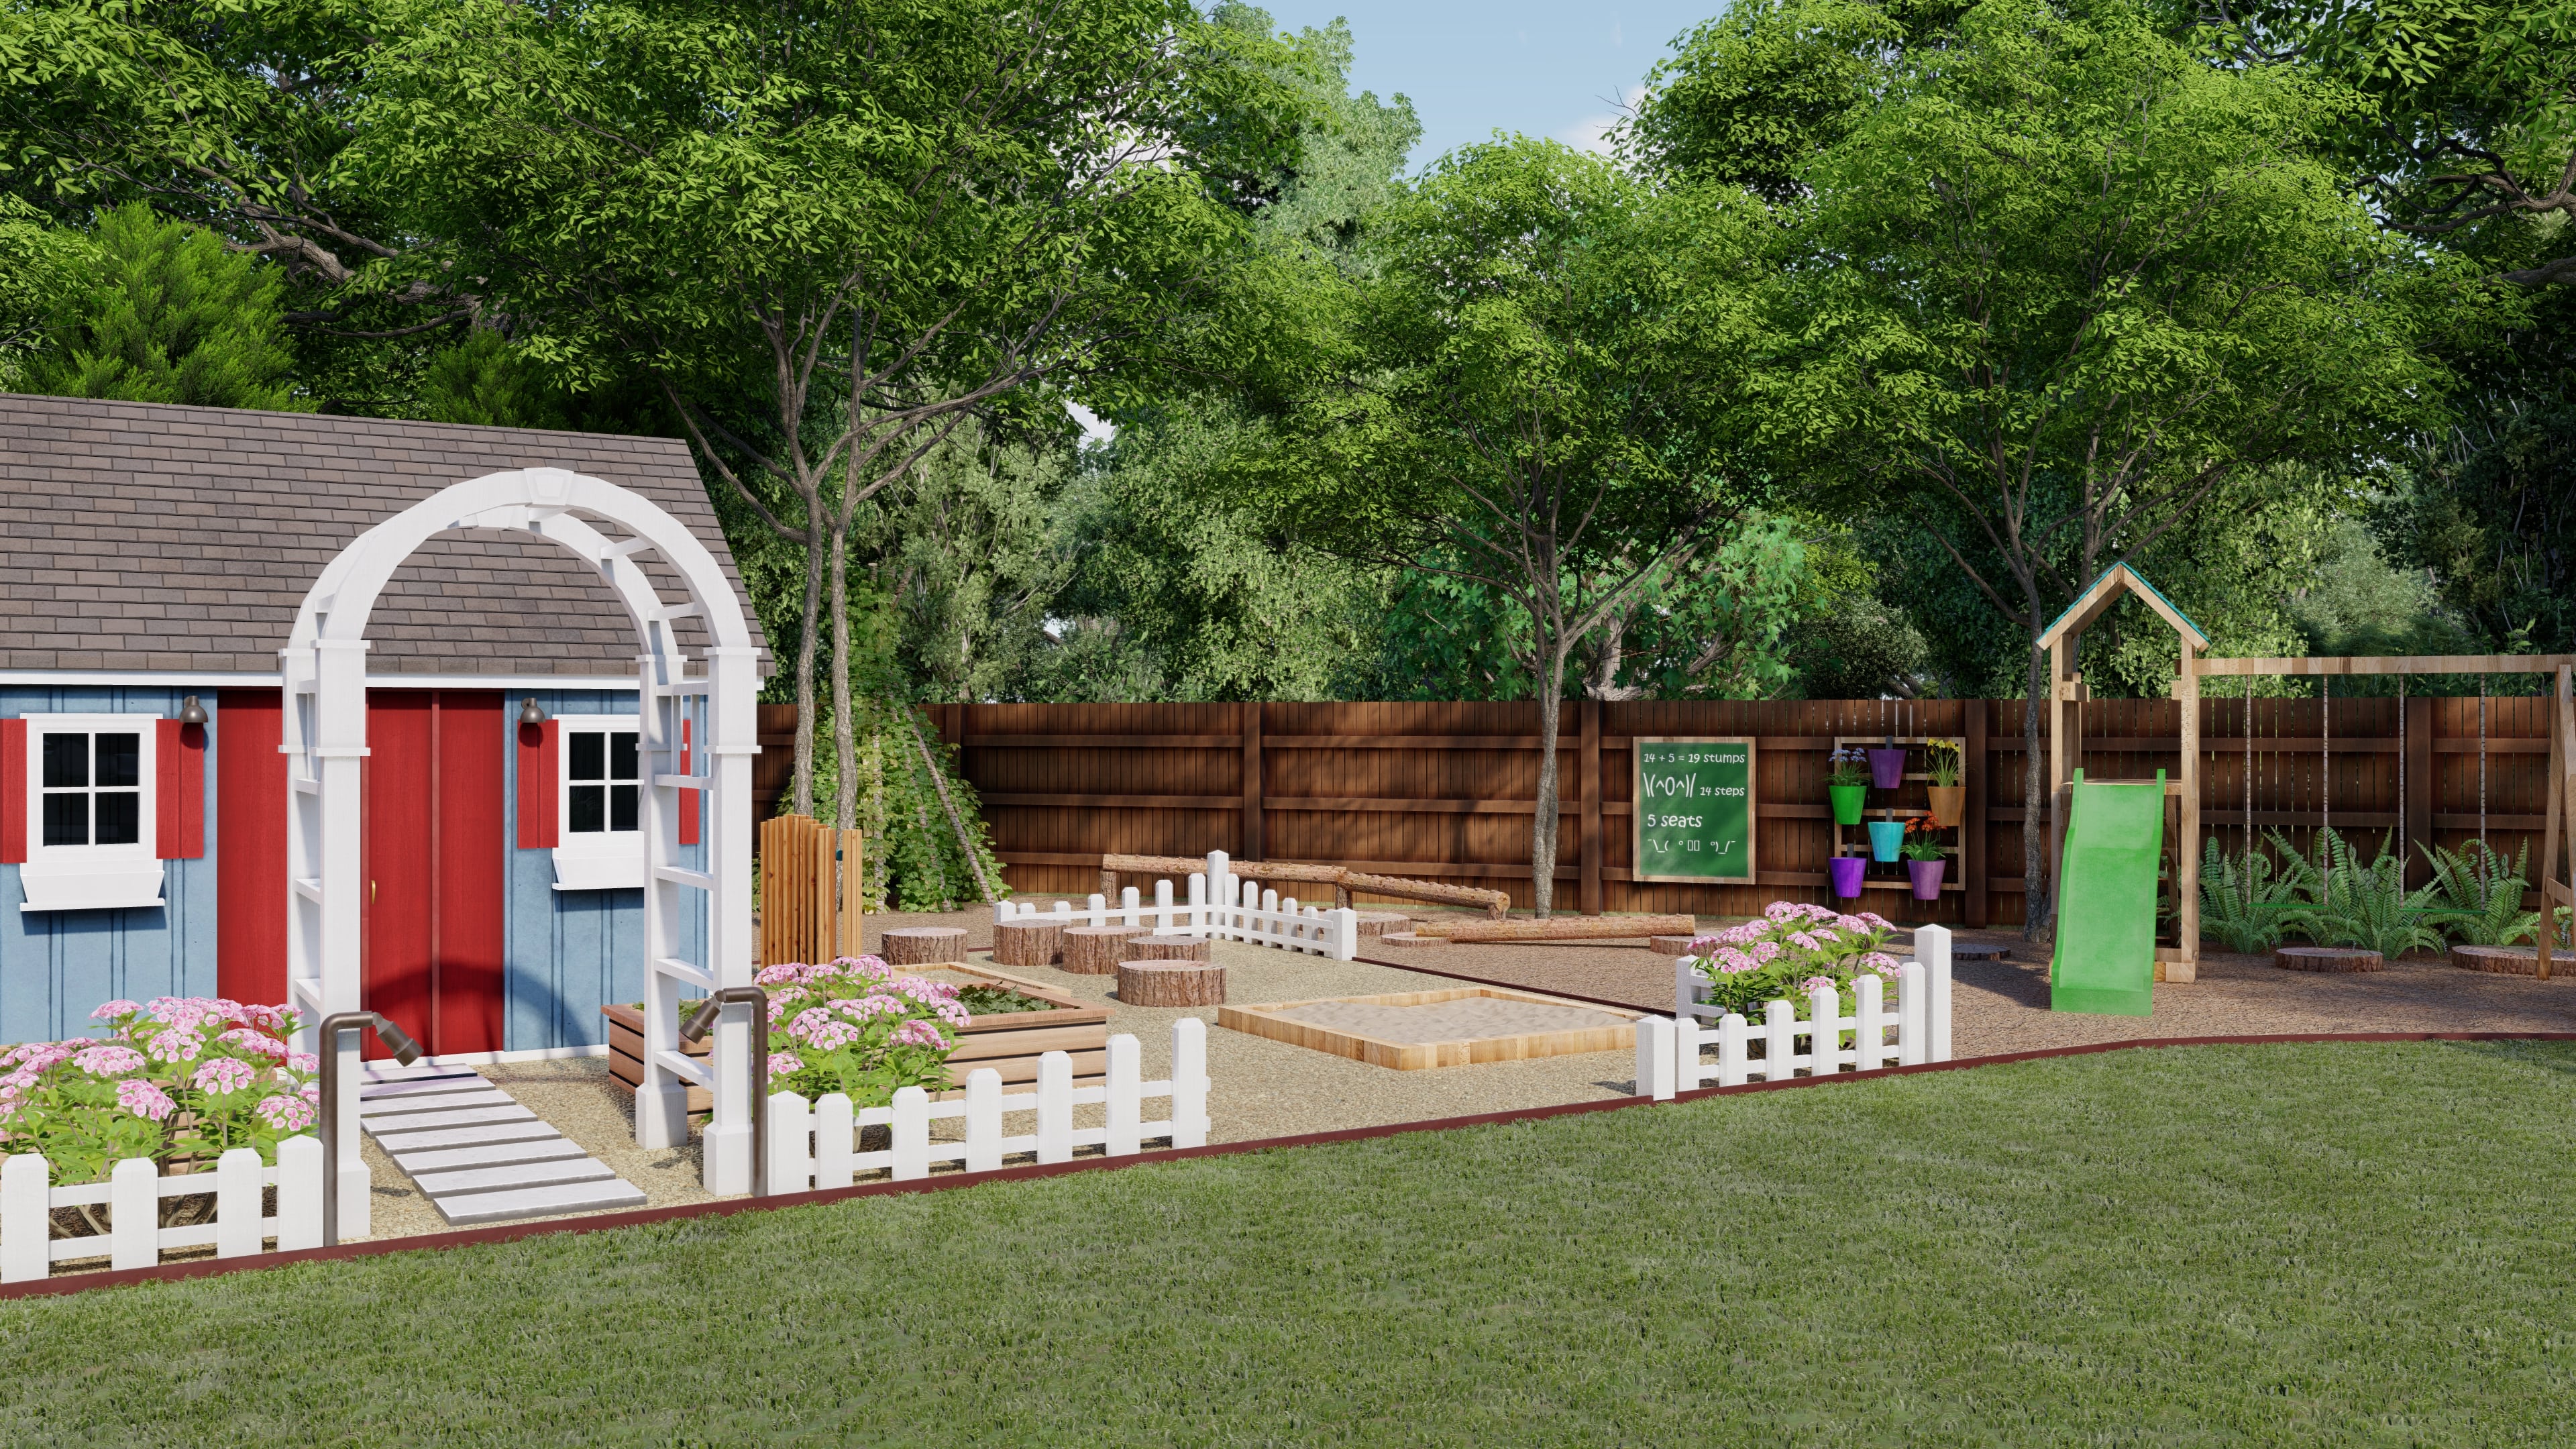 kid friendly backyard ideas, a backyard garden play space with sand, a kid house, trees and flowers 